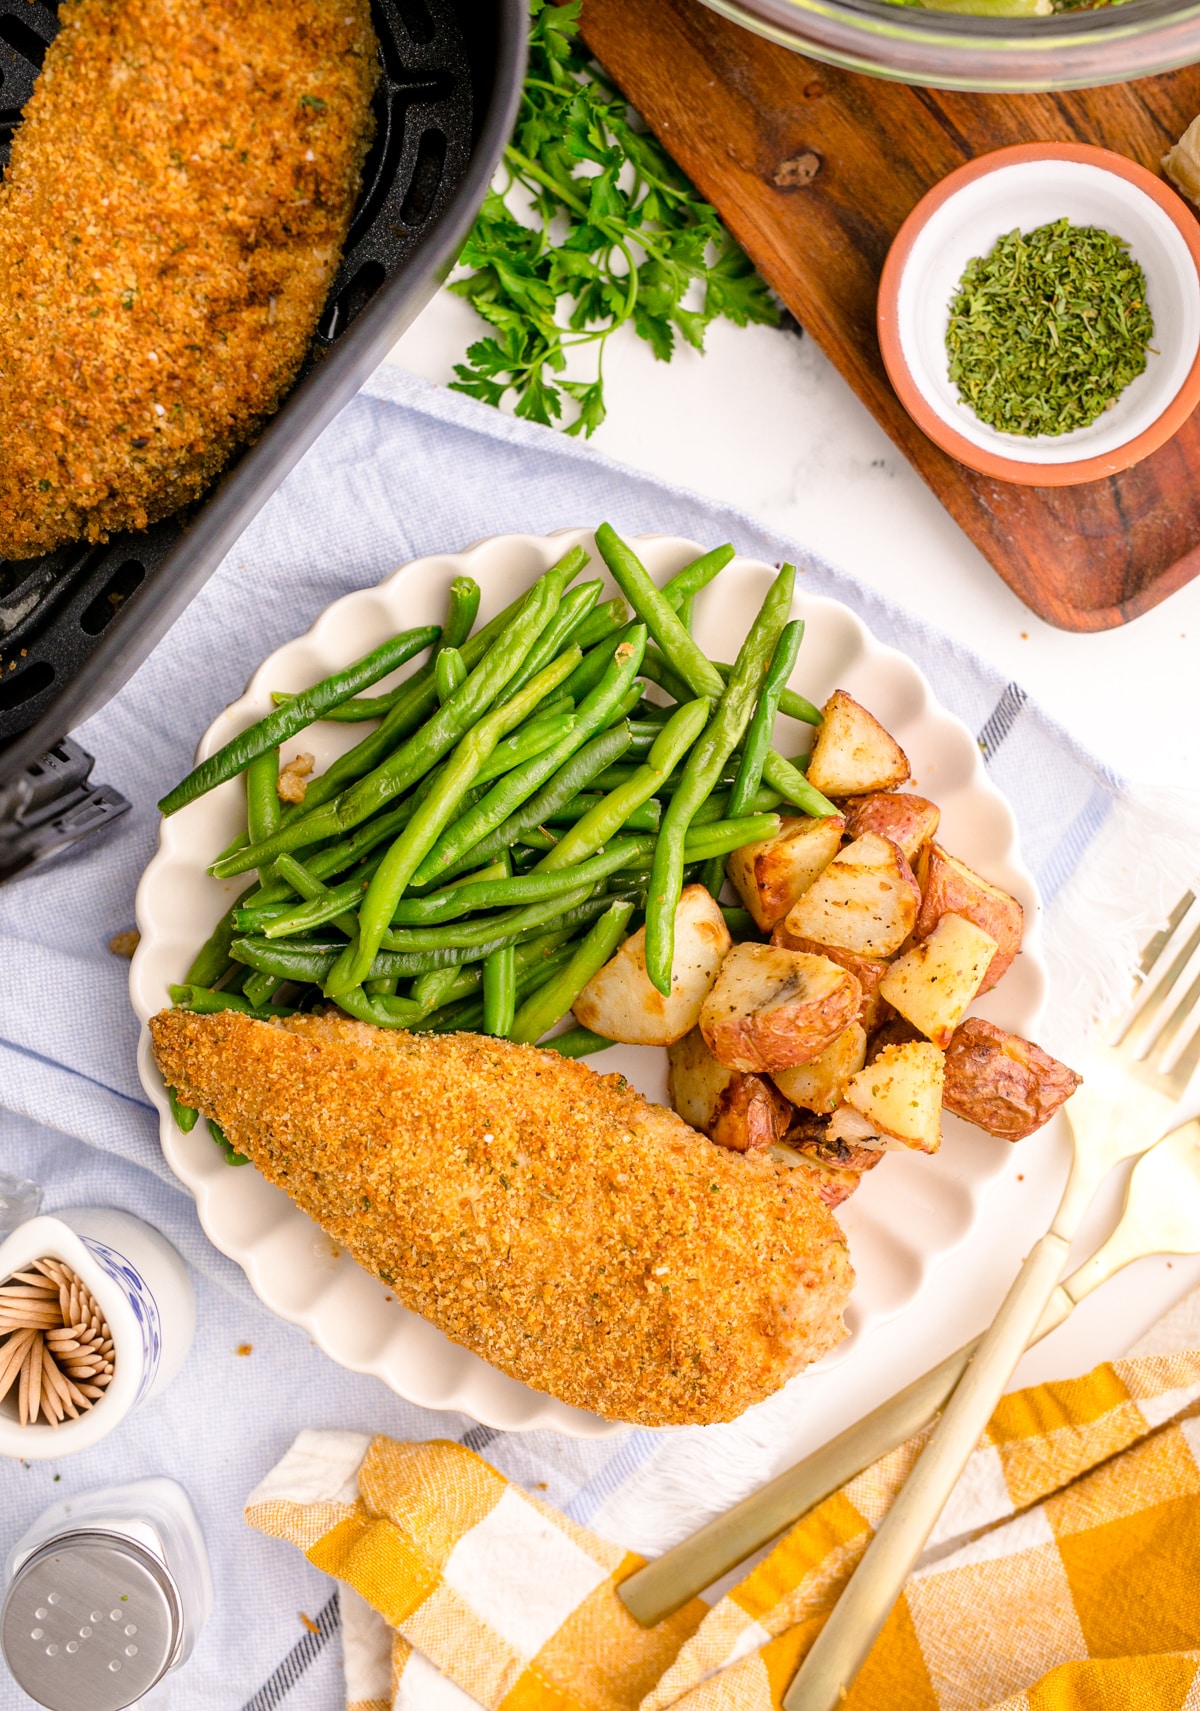 Baked chicken on a plate with roasted potatoes and green beans taken from a bird's eye view.